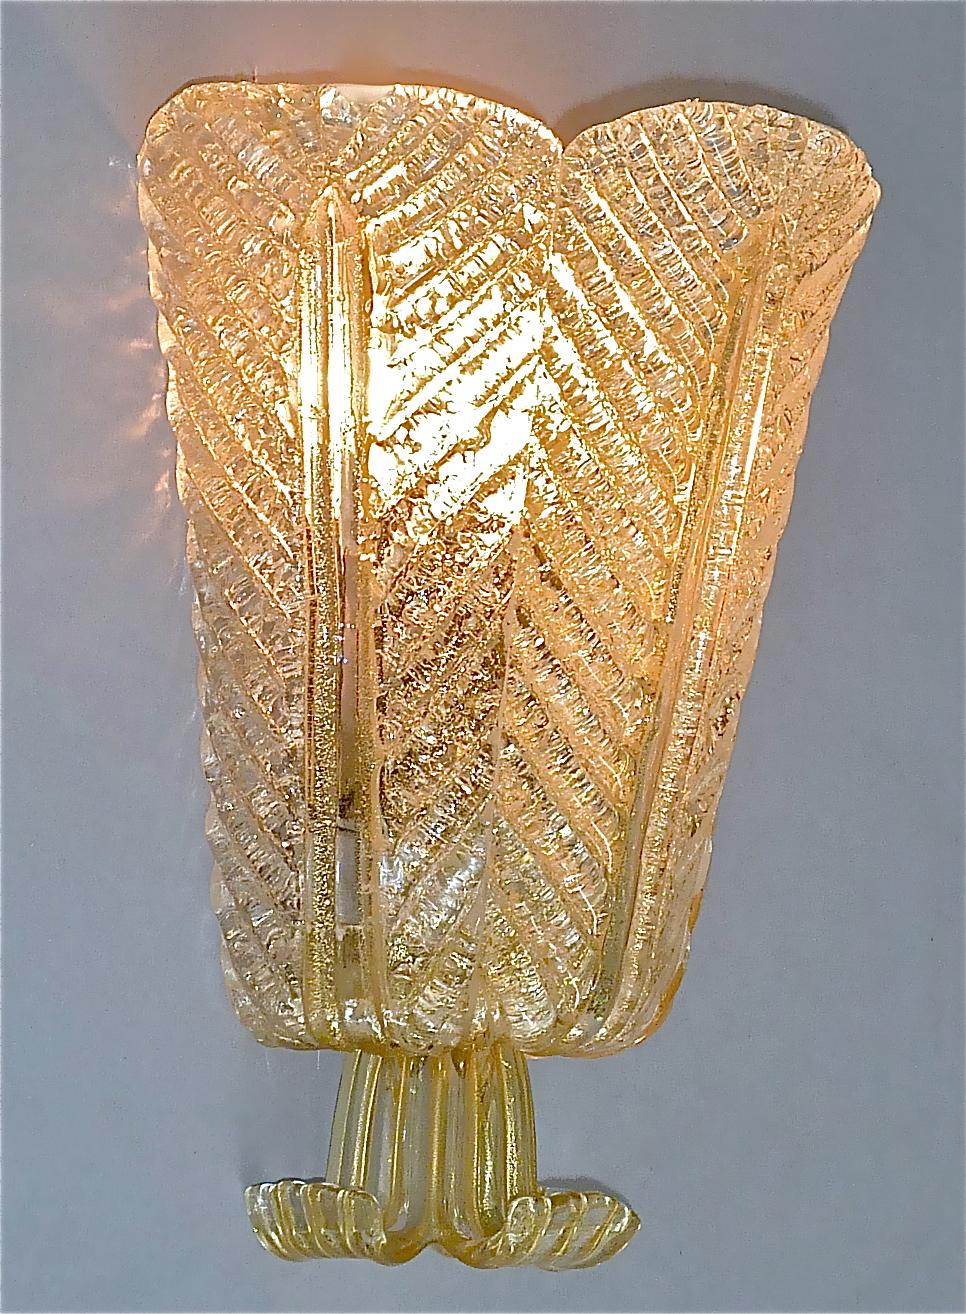 Rare Ercole Barovier Toso Flower Leaf Sconce Lamp Gold Murano Glass Art Deco For Sale 9